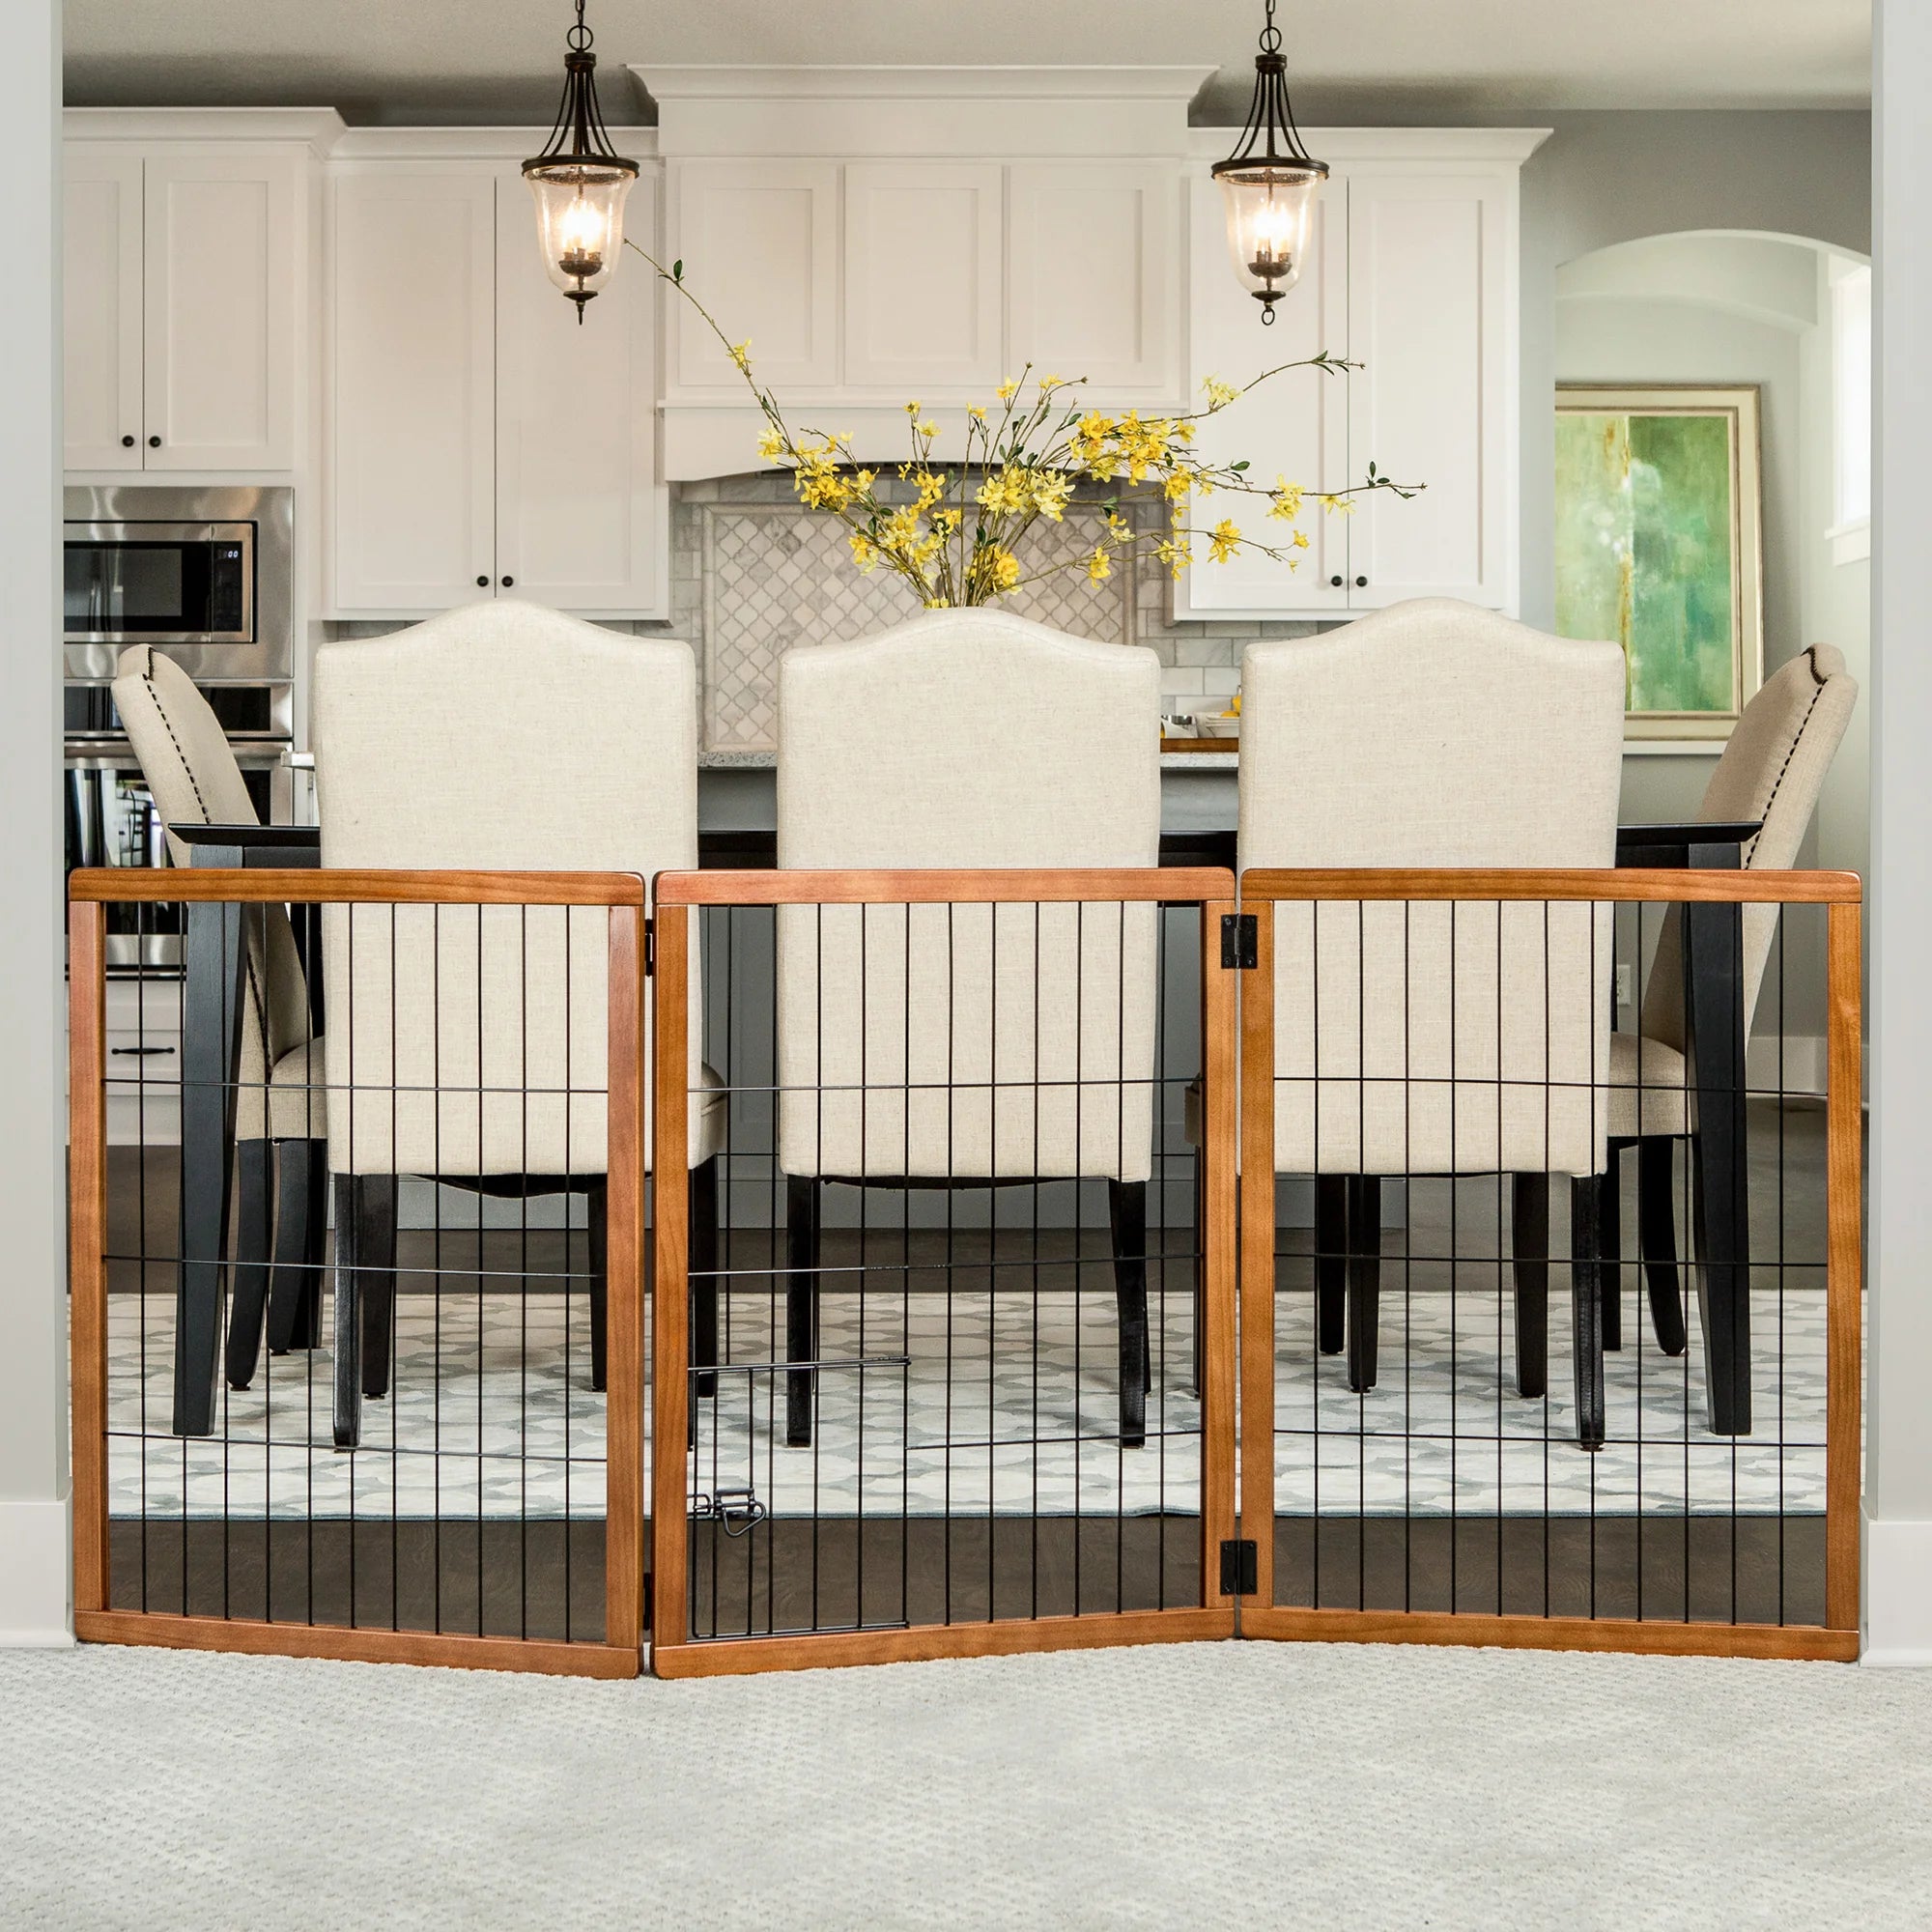 Design Paw Tall 3 Panel Wooden Pet Gate set up in a dining room.